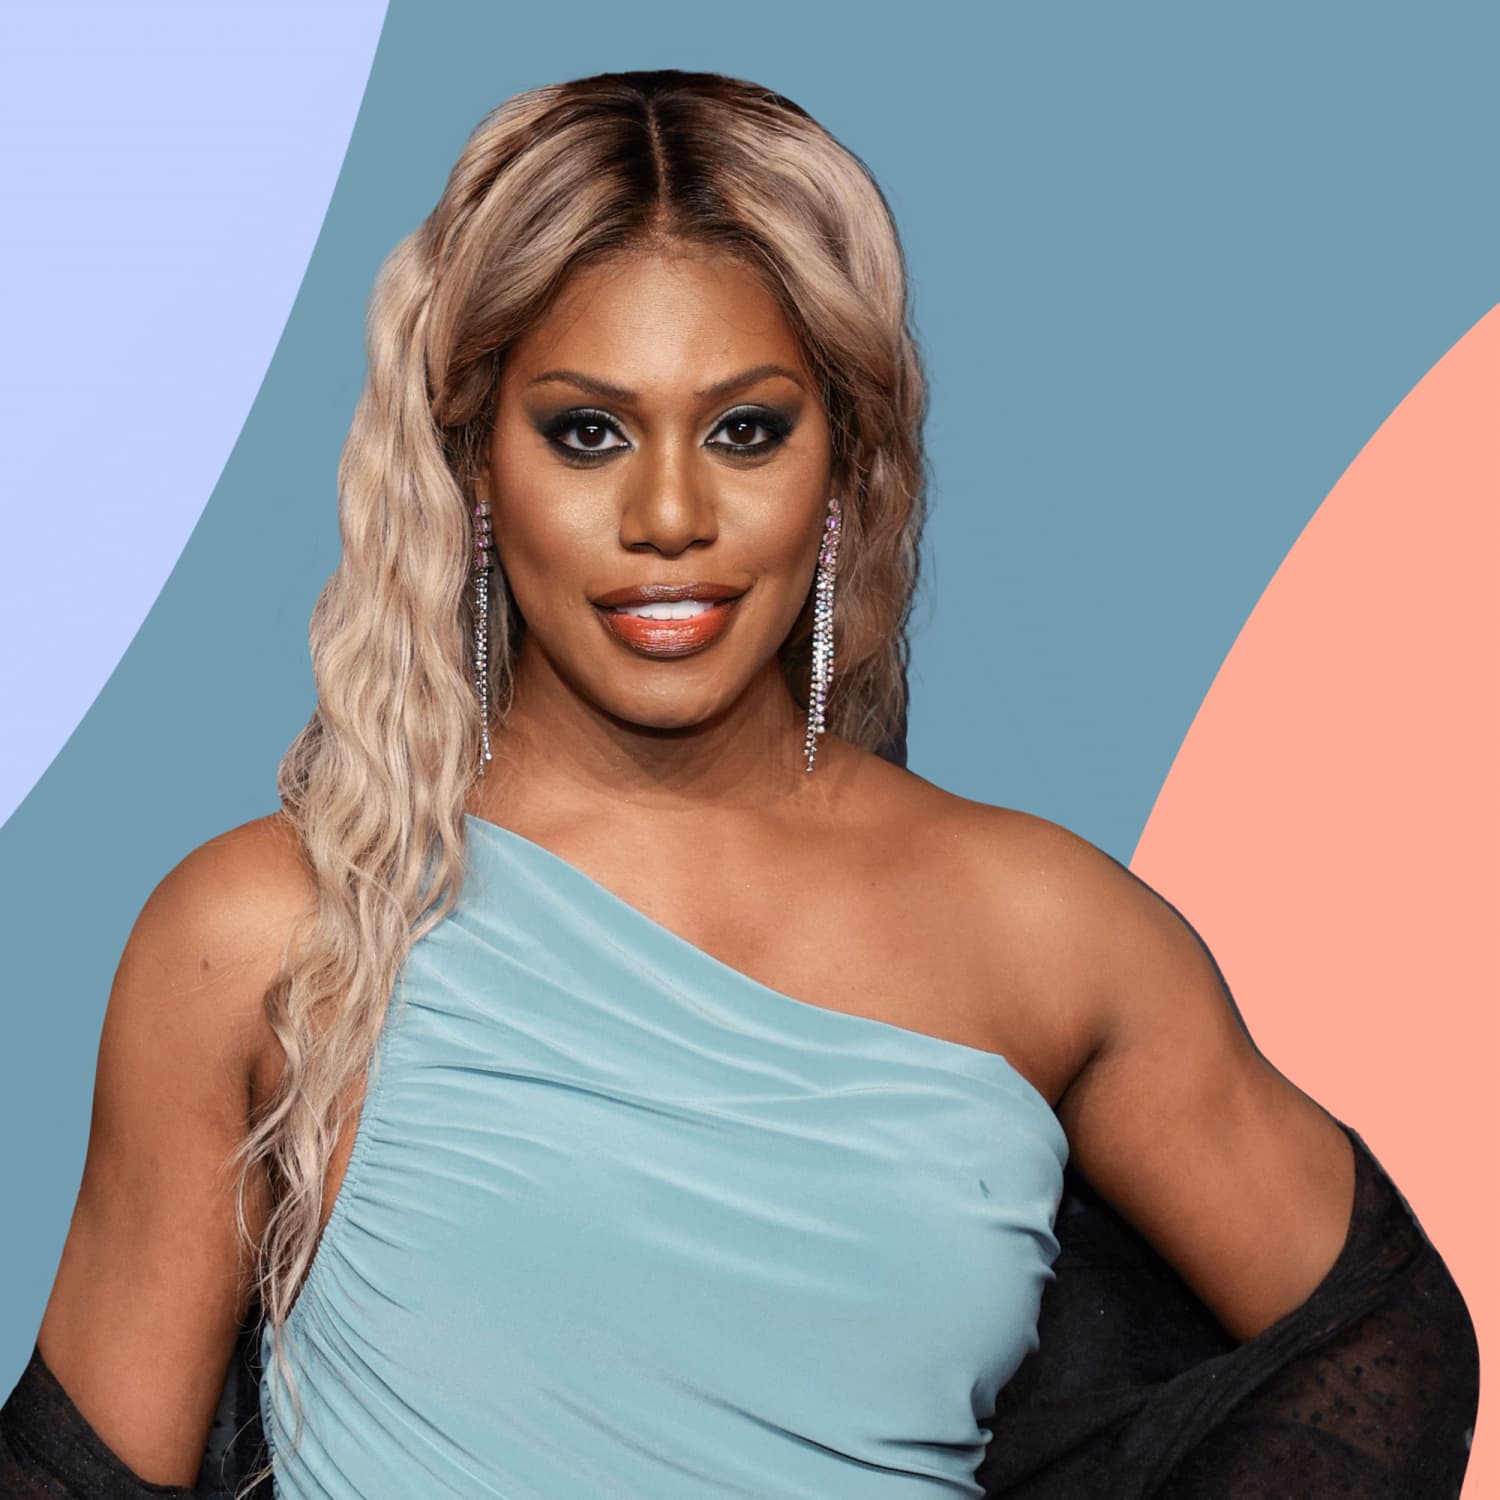 Laverne Cox's 634 Square-Foot NYC Studio Has So Many Space-Saving Details  You'll Want to Steal